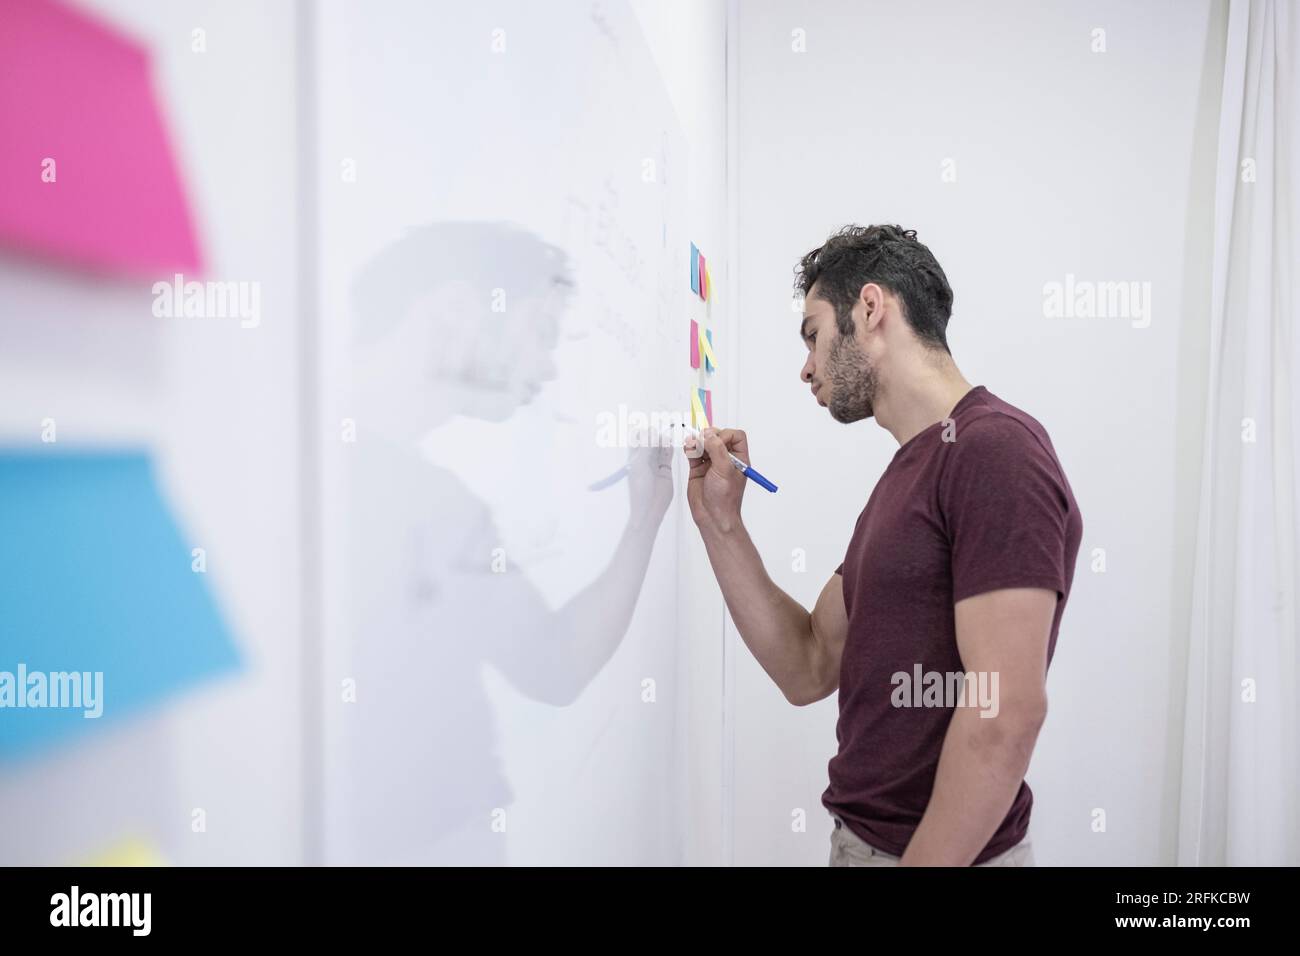 Man giving a presentation on a whiteboard Stock Photo